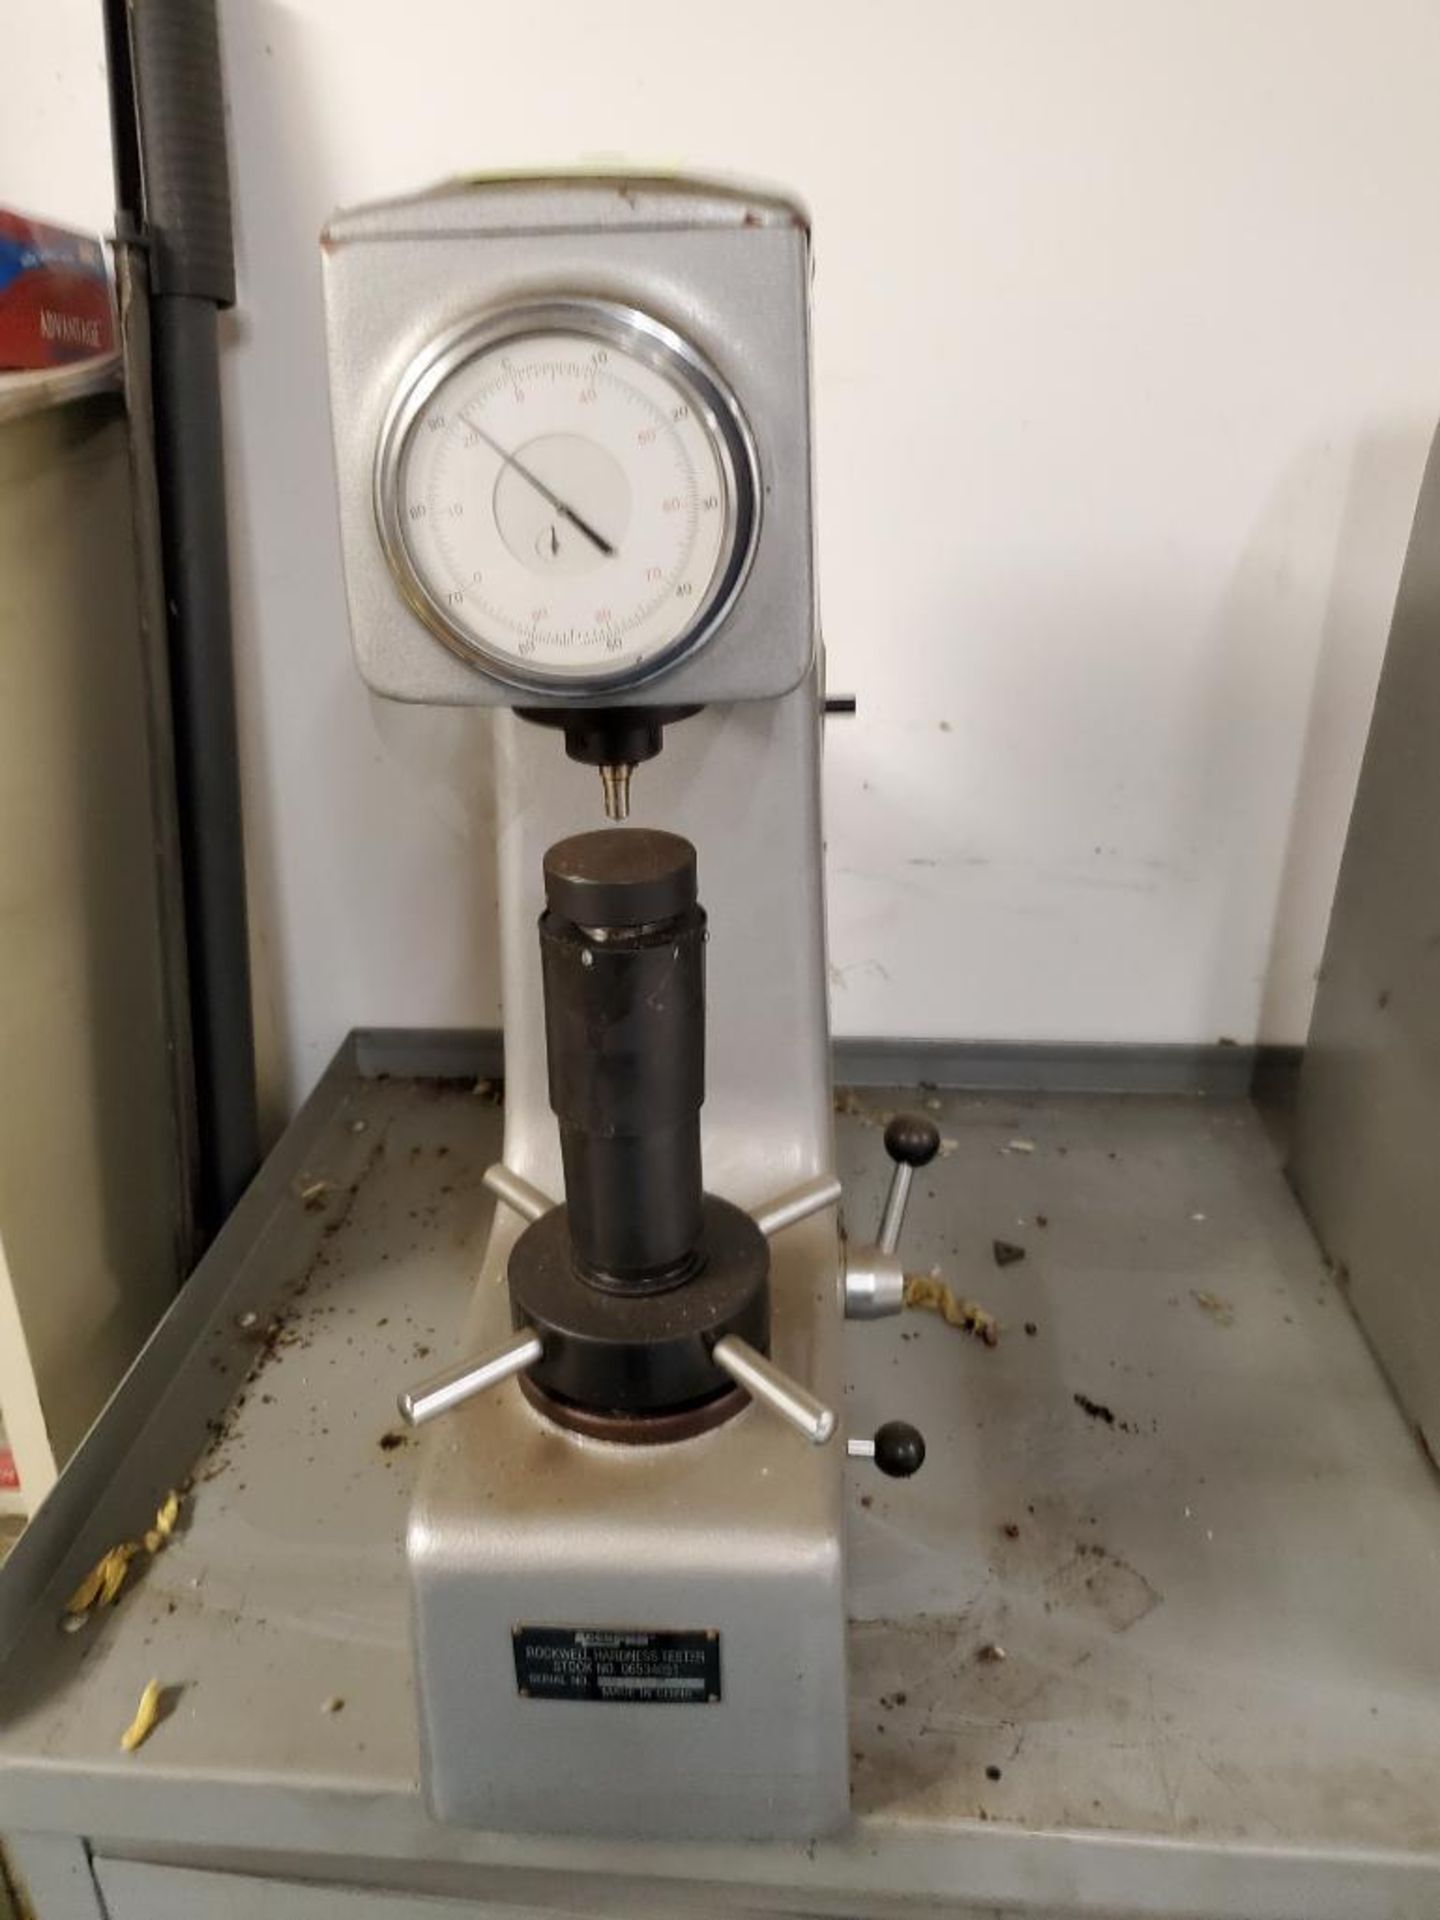 Accupro Rockwell Hardness Tester 06534051. Serial#1557.